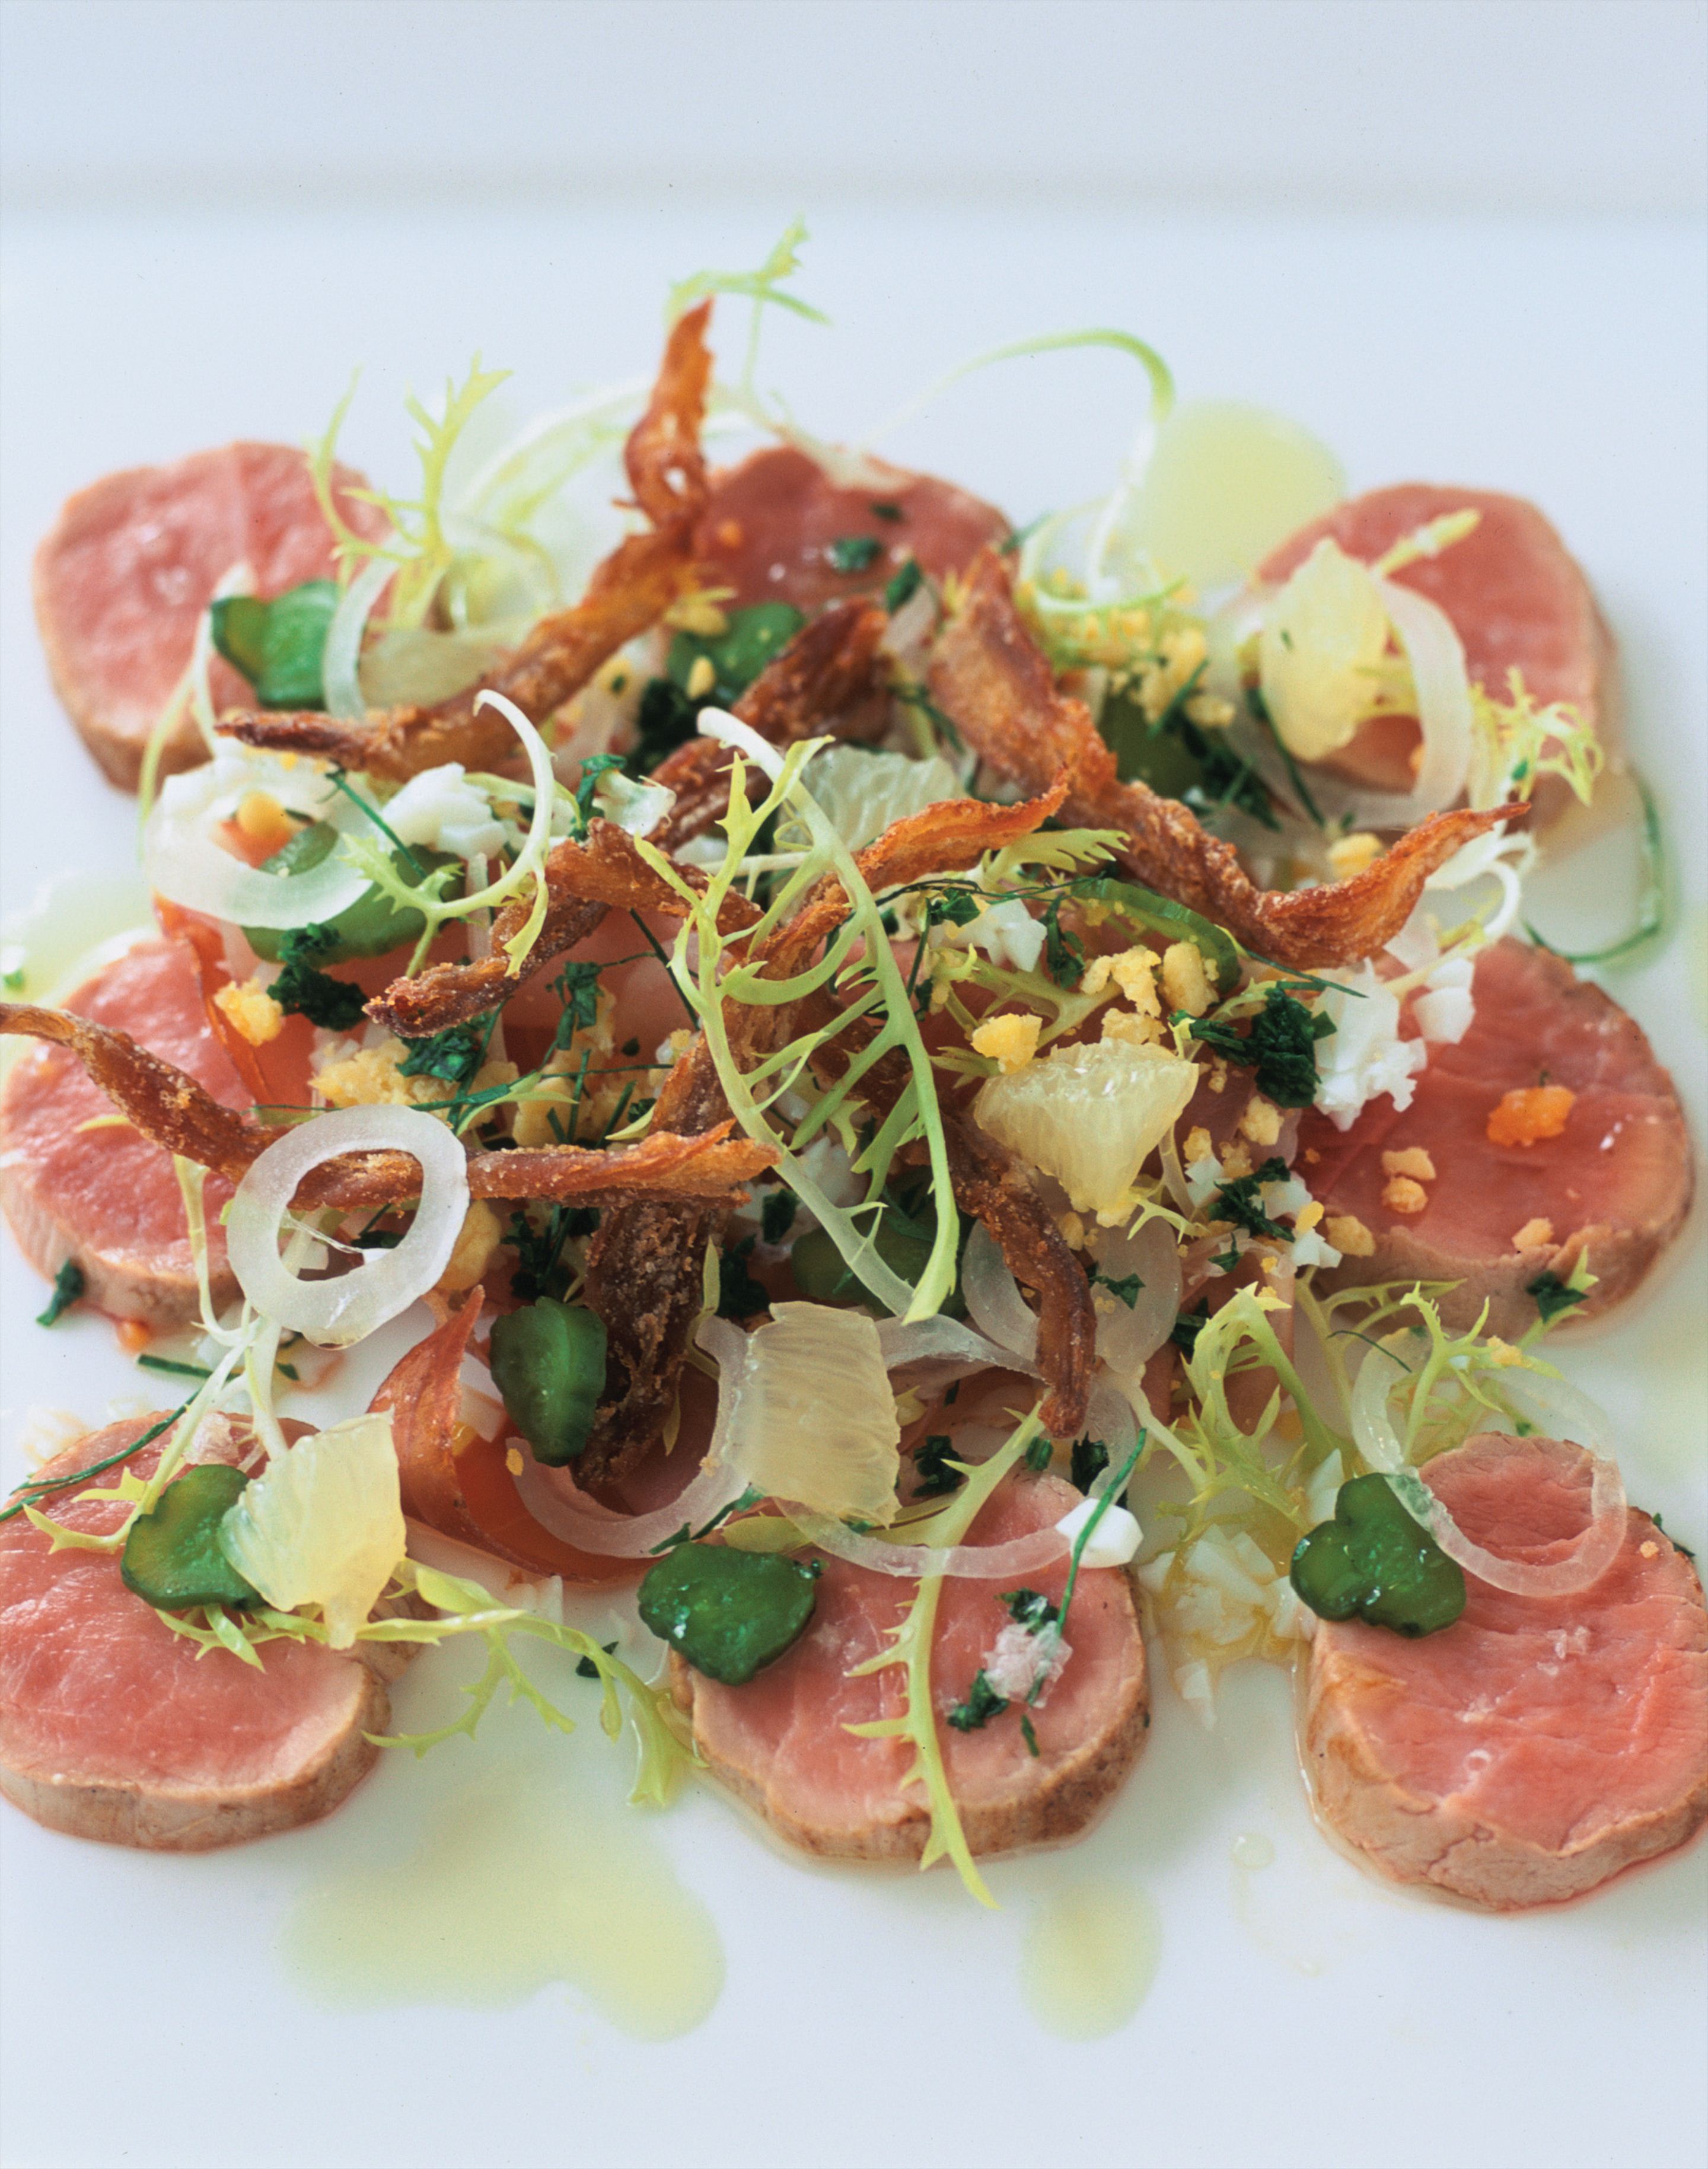 Slow-poached fillet of pork with gribiche vinaigrette and crisp pig’s tail